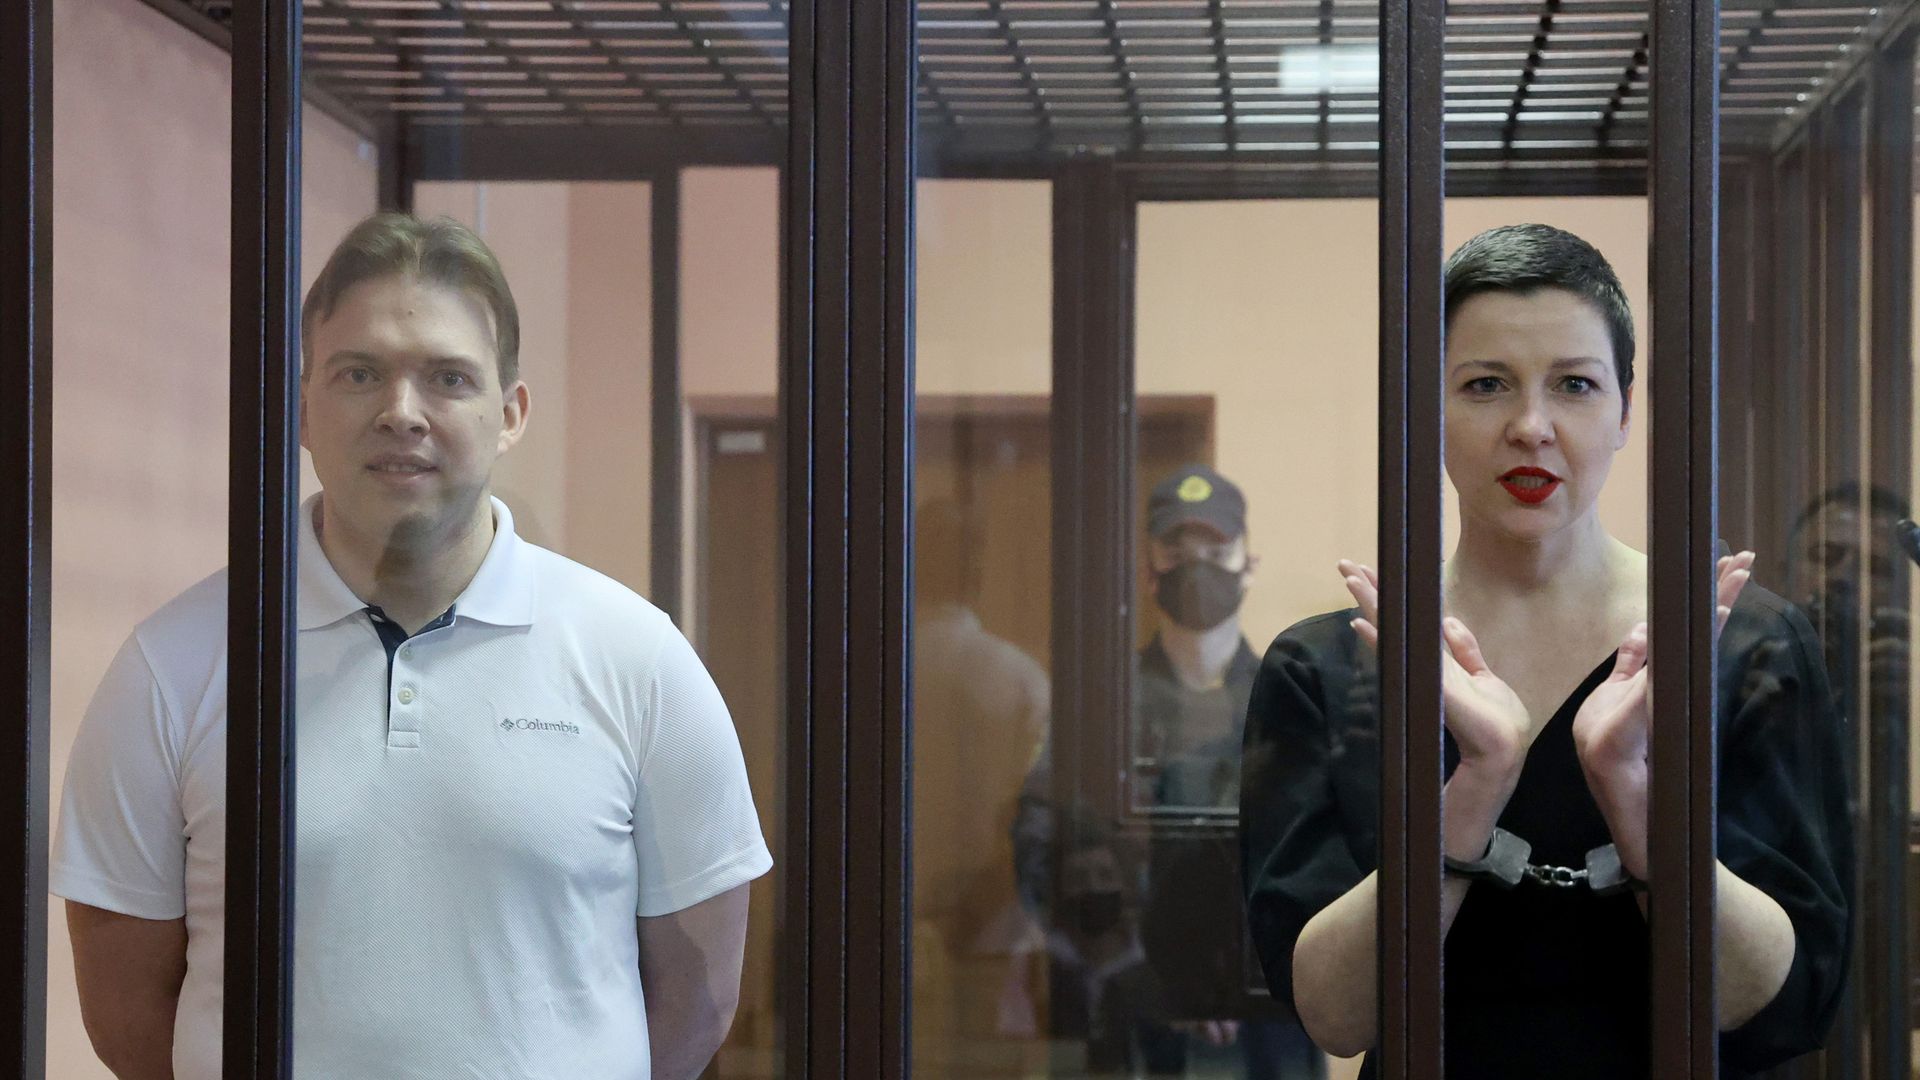 Belarusian opposition activists Maxim Znak and Maria Kolesnikova appear for a sentencing hearing at the Minsk Region Court